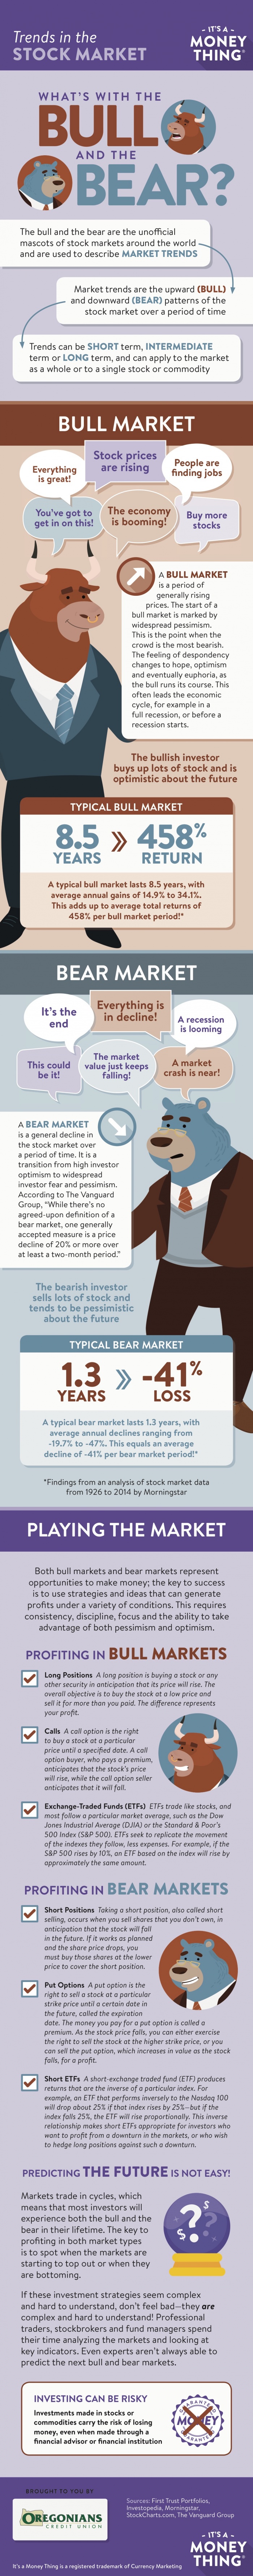 Trends in the Stock Market Infographic